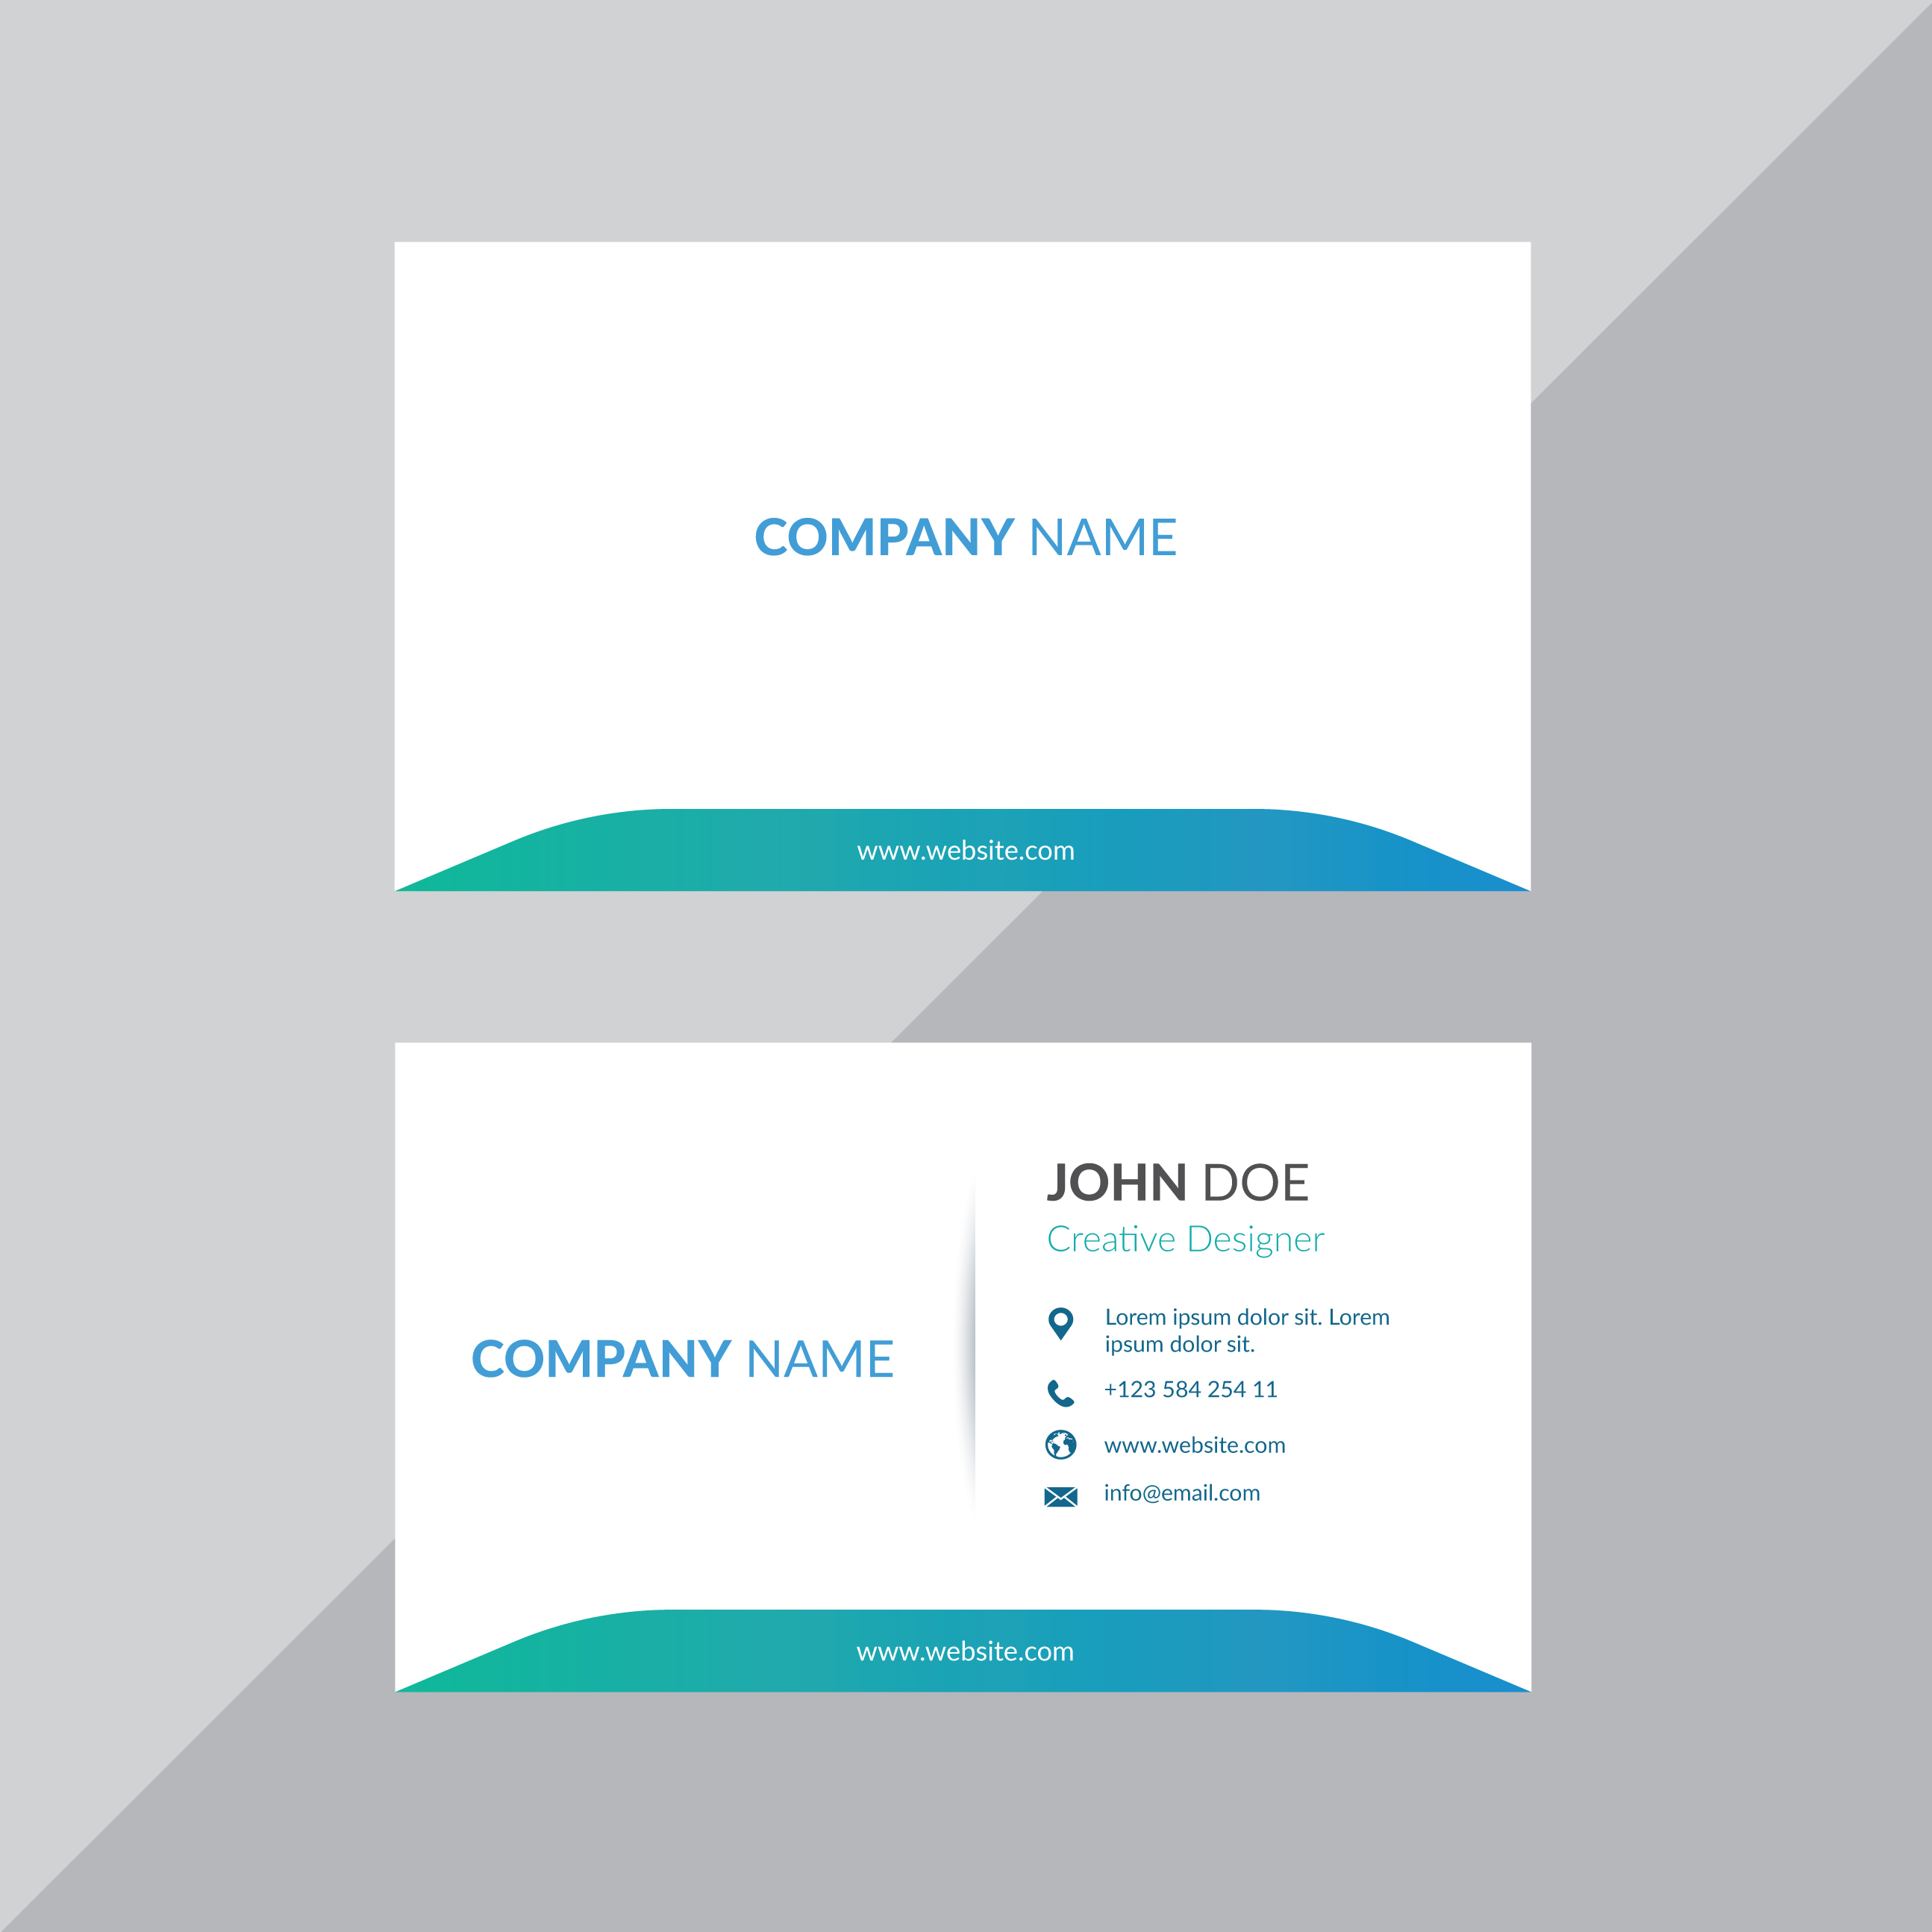 20-free-psd-business-card-templates-images-free-business-card